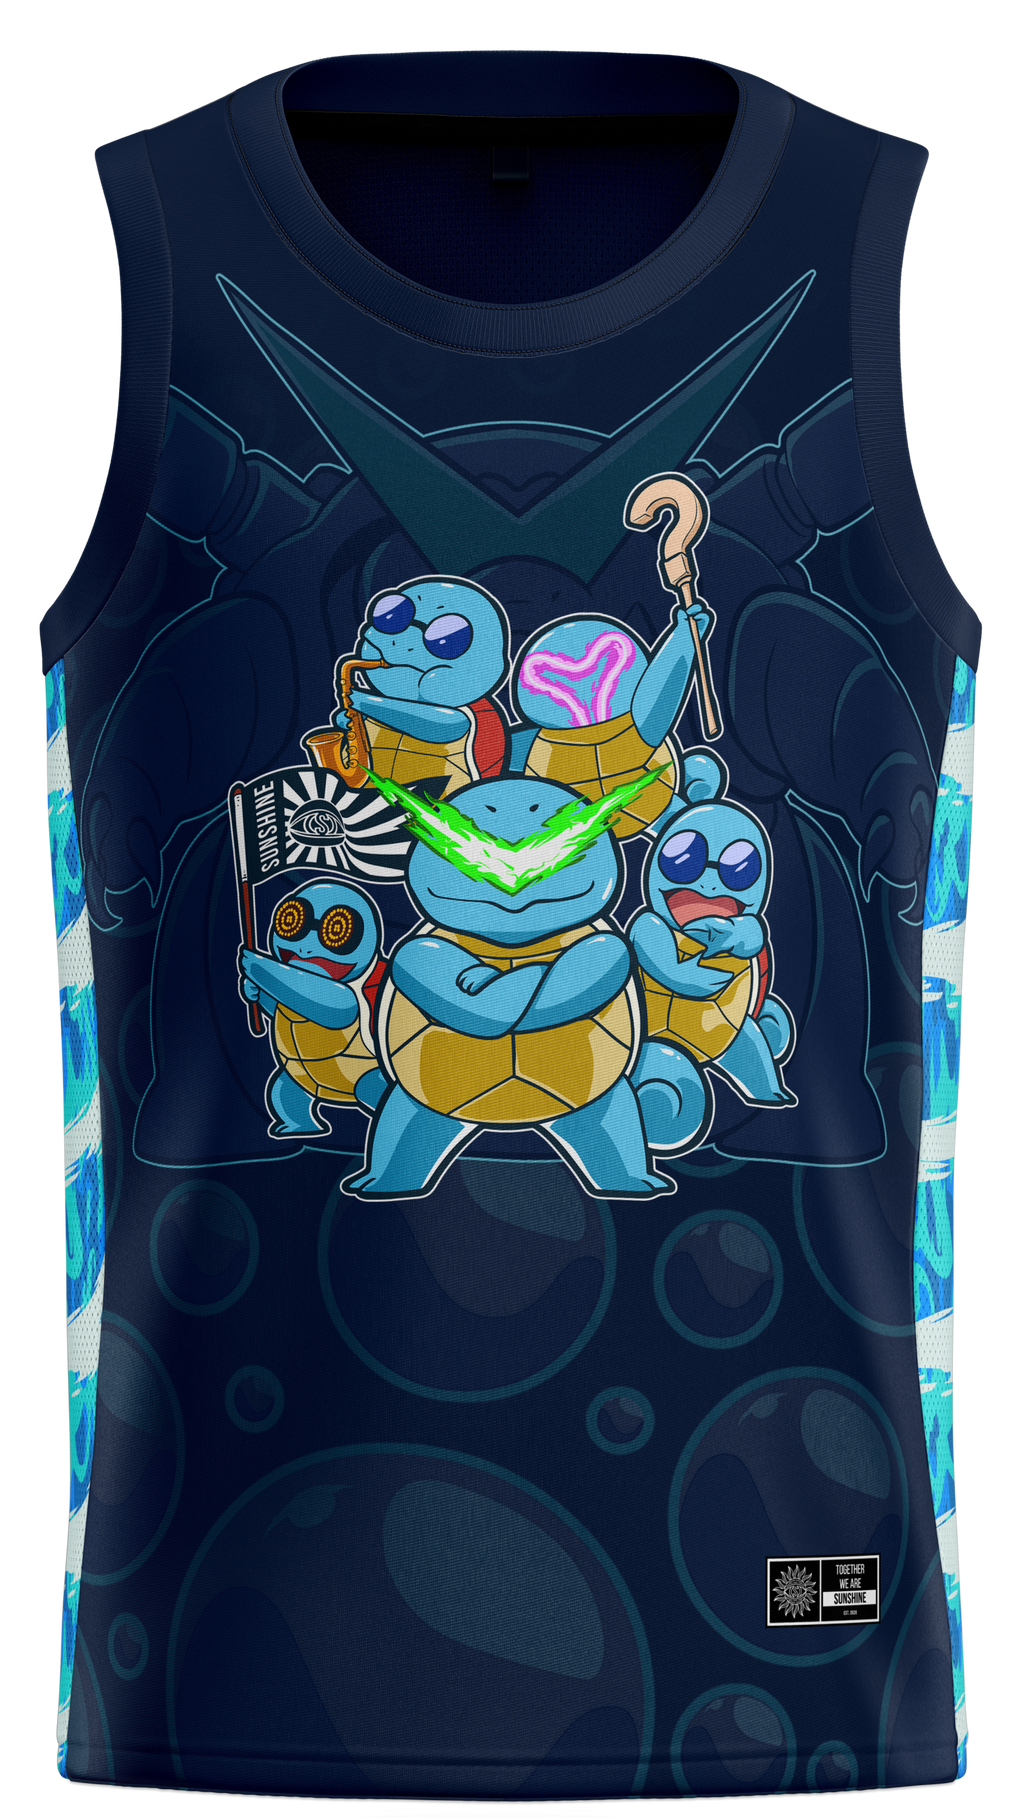 SQUIRTLE SQUAD BASKETBALL JERSEY